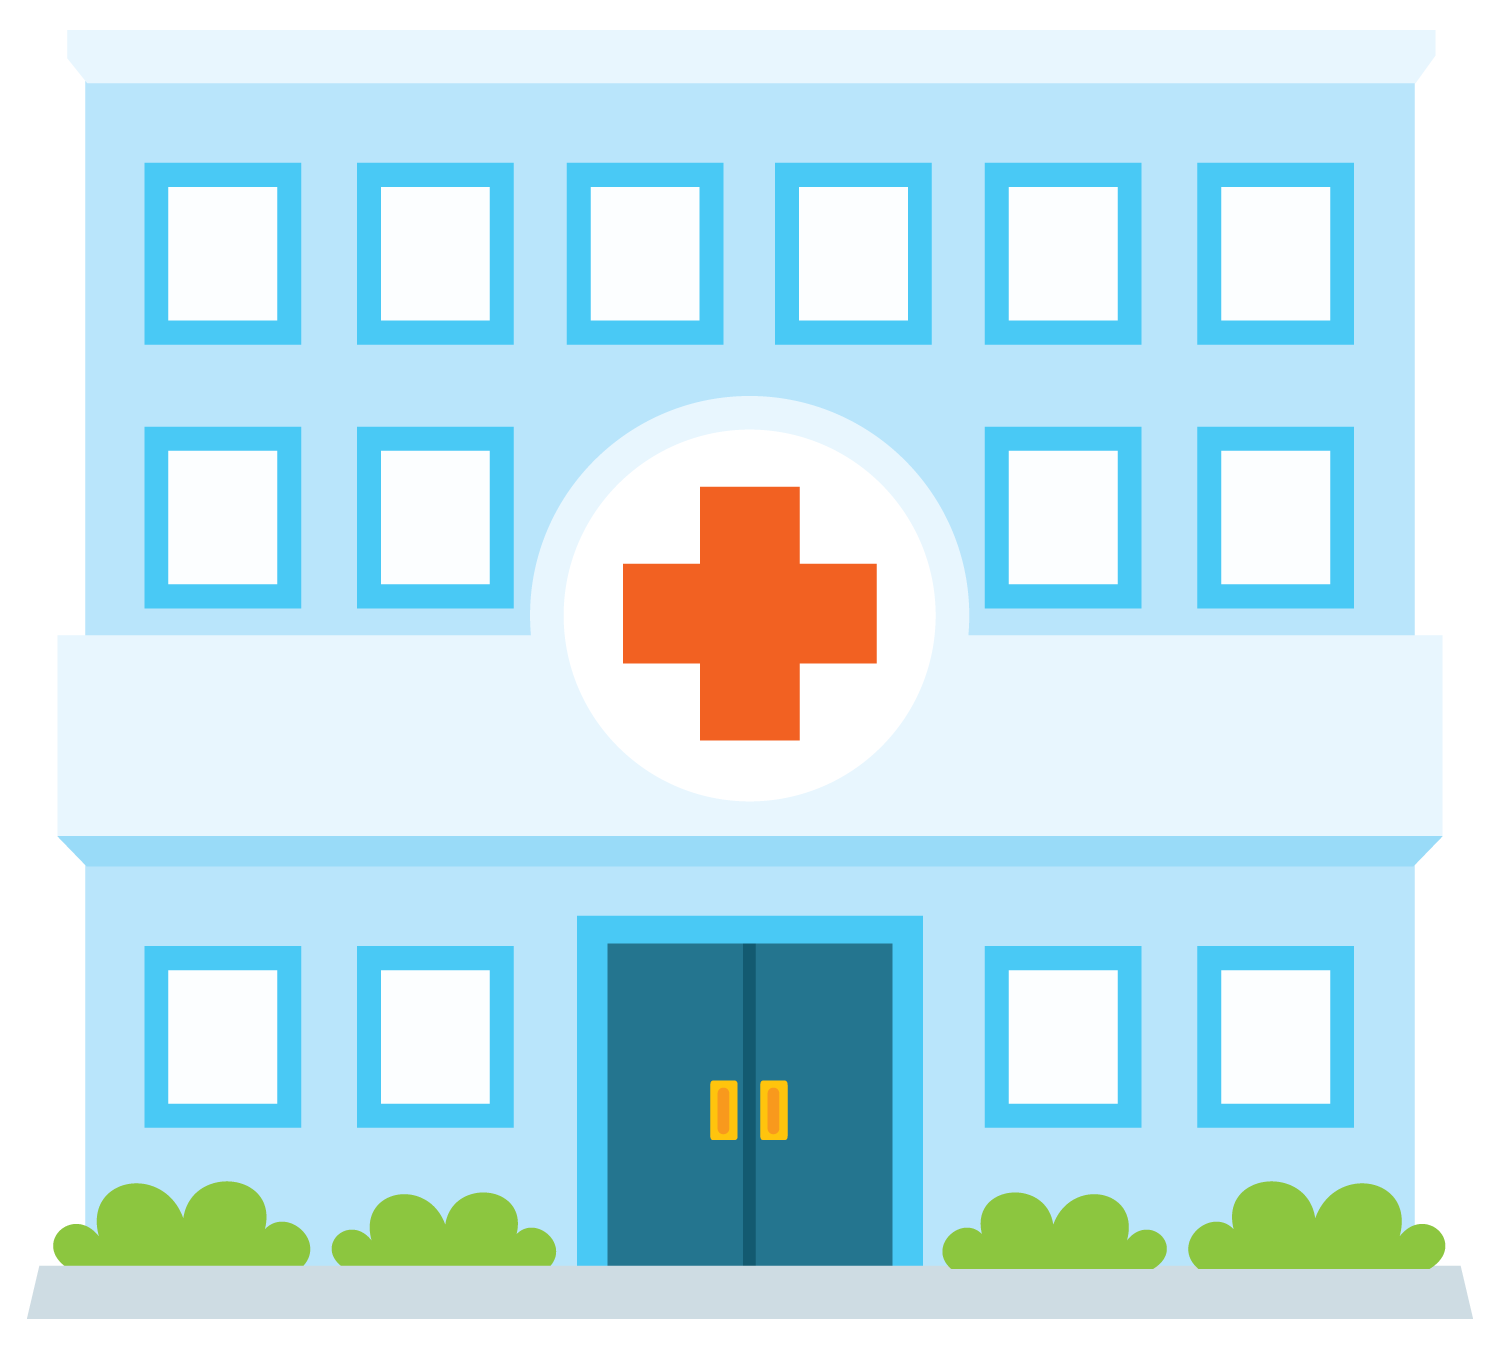 Clipboard clipart hospital. Free to use public